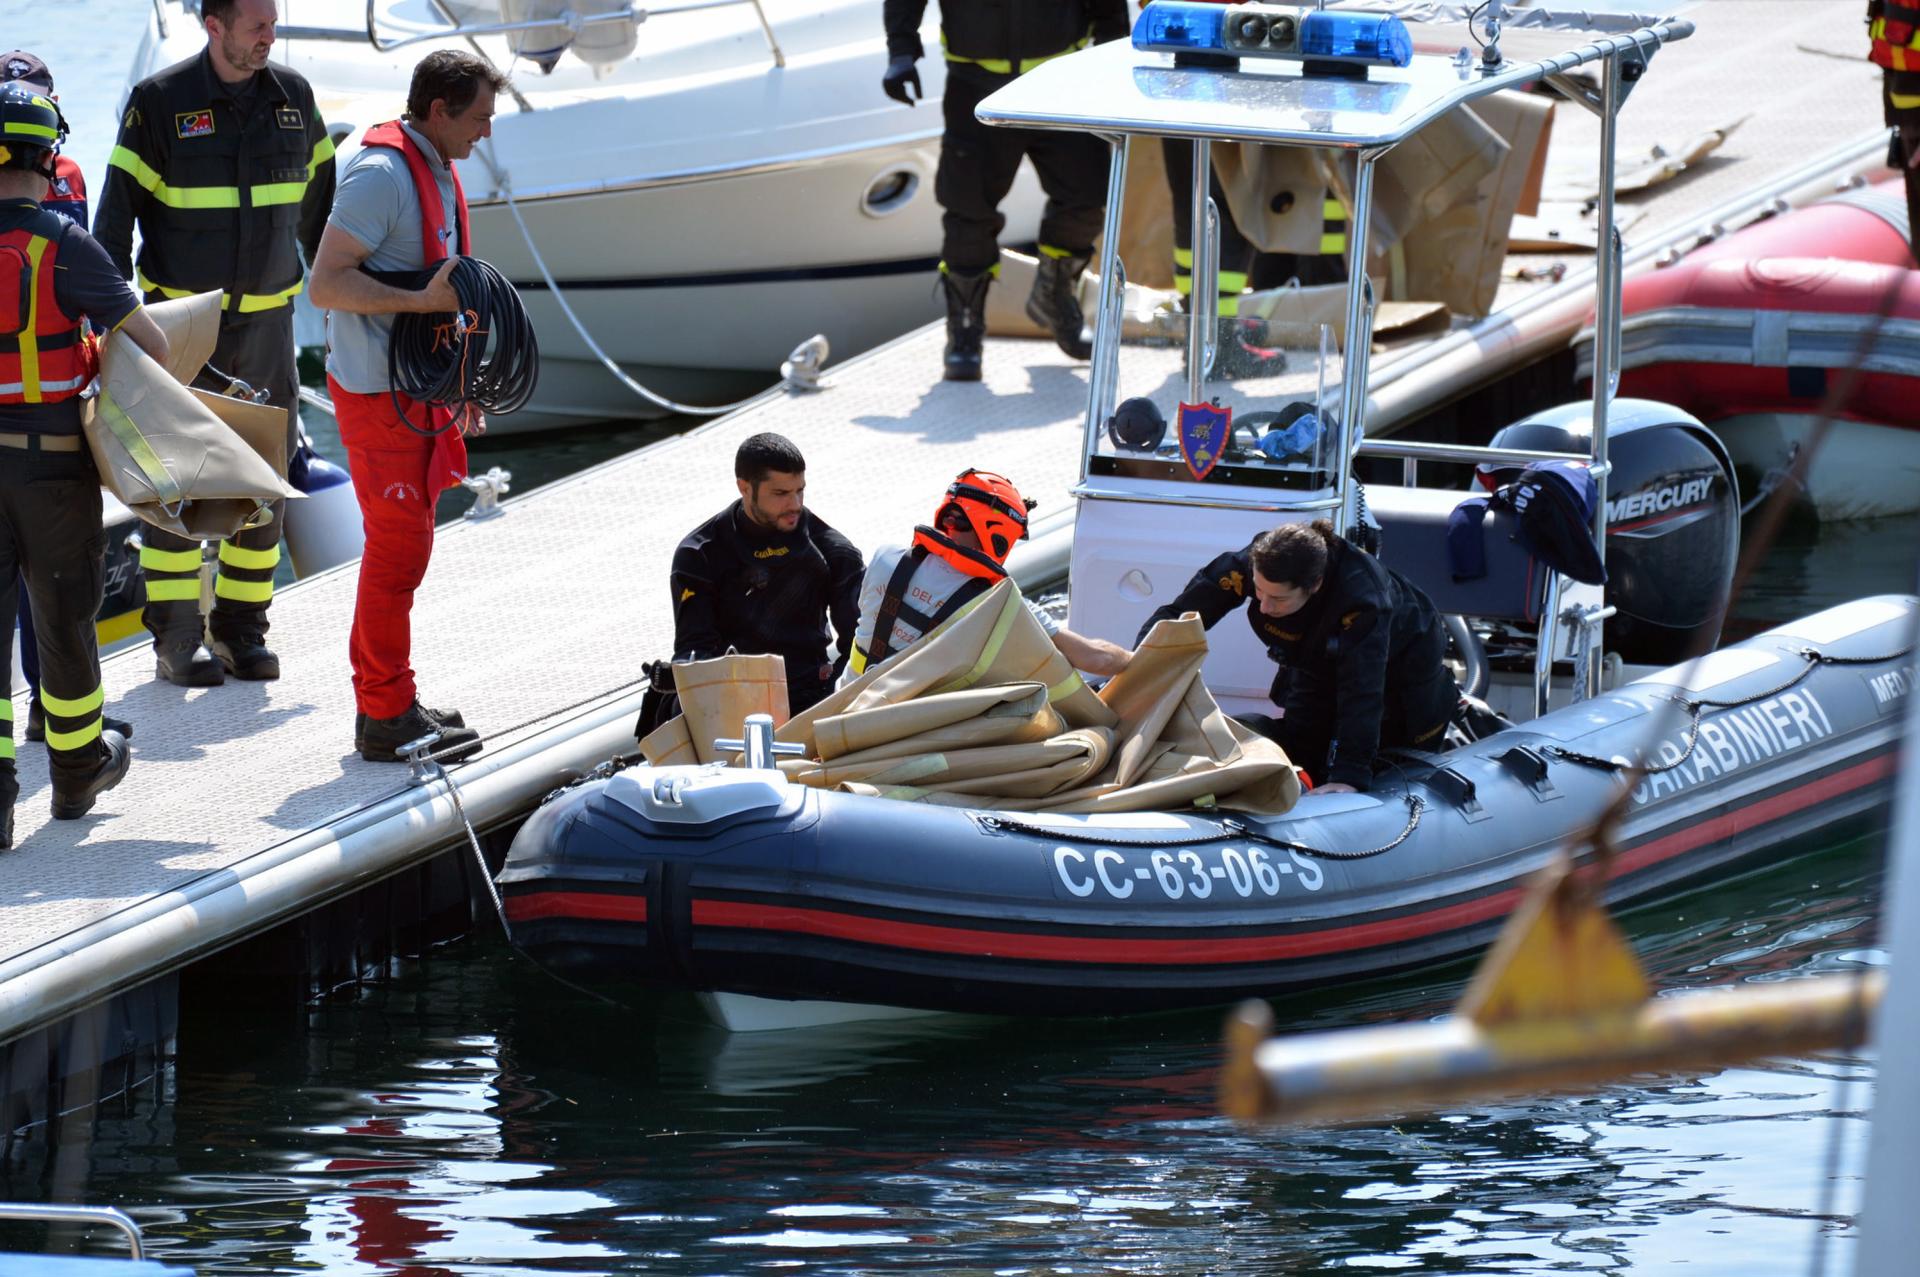 Carabinieri and fire brigade officers take part in the search and rescue operation in Lake Maggiore after a tourist boat capsized near Lisanza (Varese), northern Italy, 29 May 2023. EFE/EPA/PURICELLI
